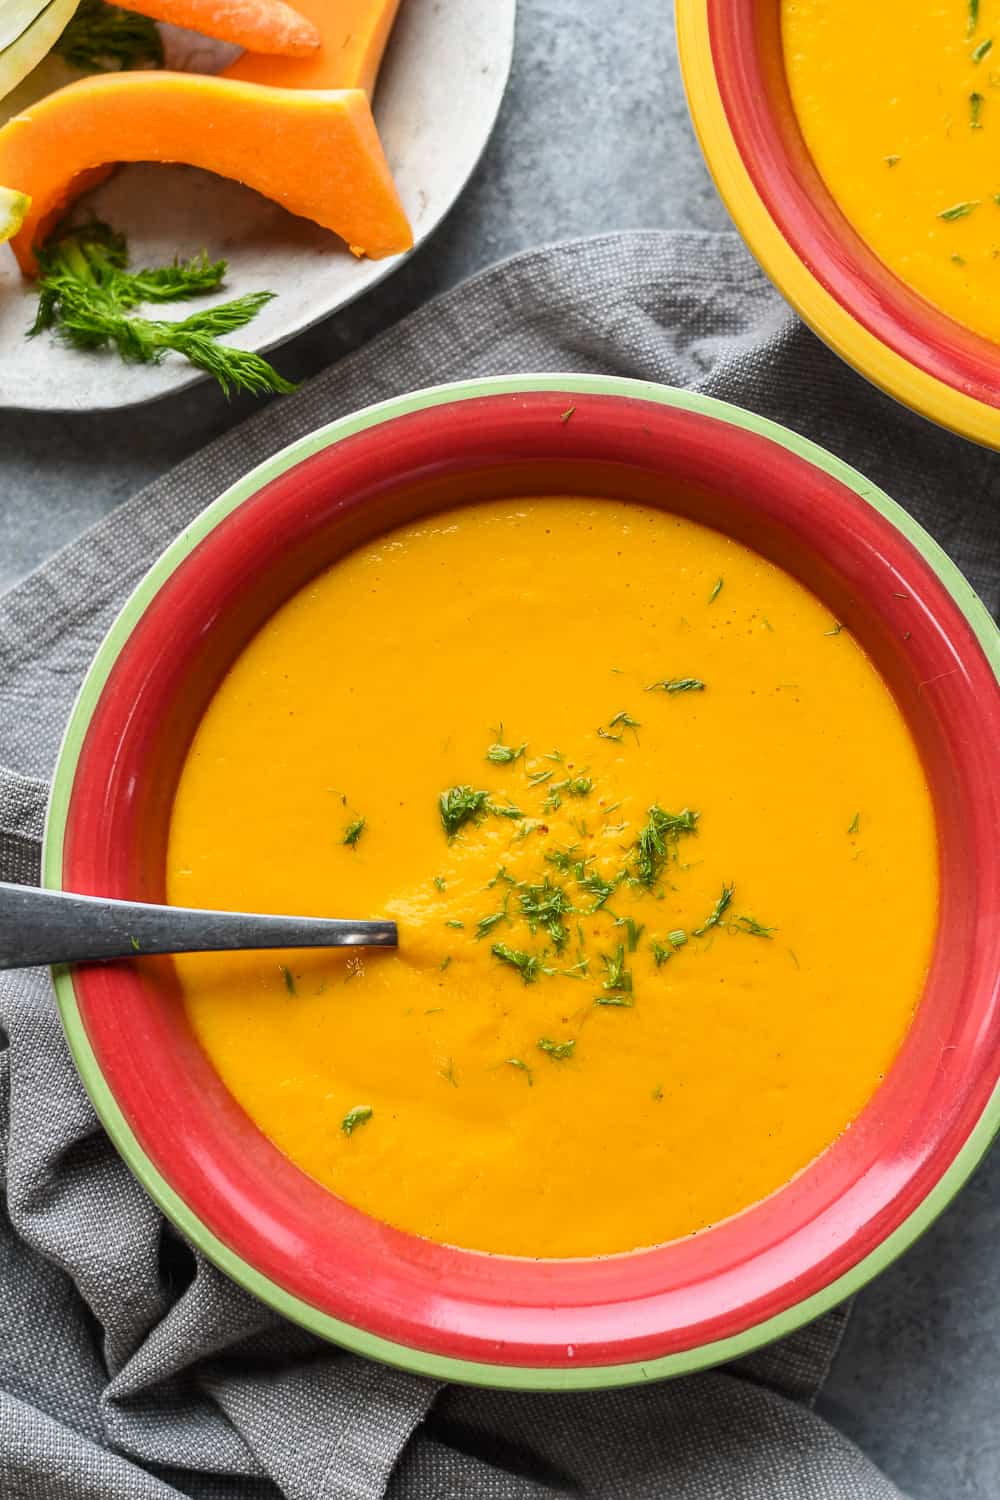 Soothing Ginger-Turmeric Carrot Soup over alone